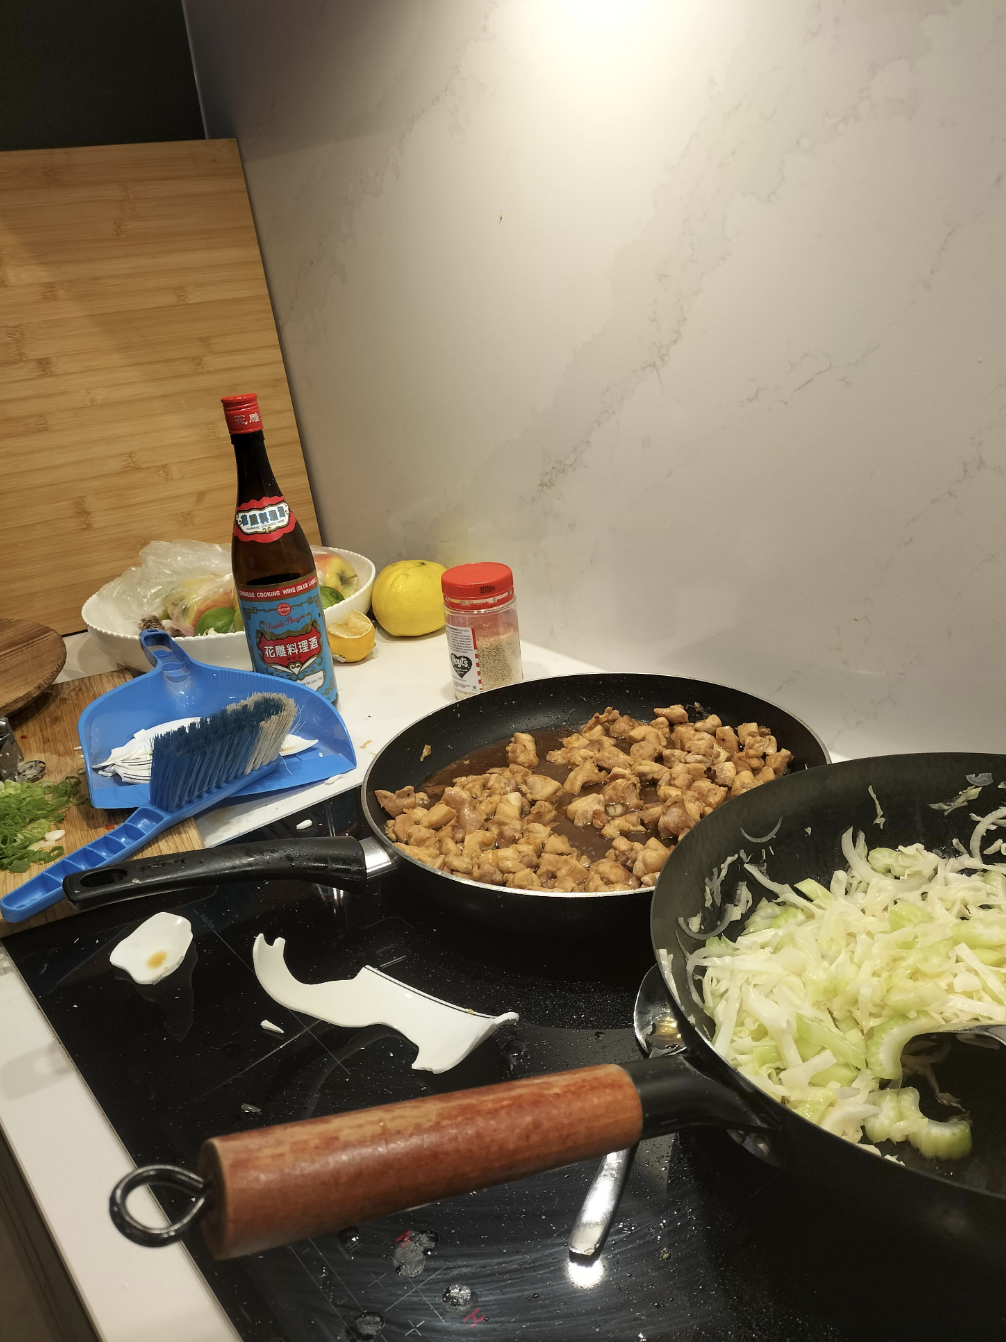 A kitchen counter with ingredients and cookware; a pan of cooked chicken and another with shredded cabbage